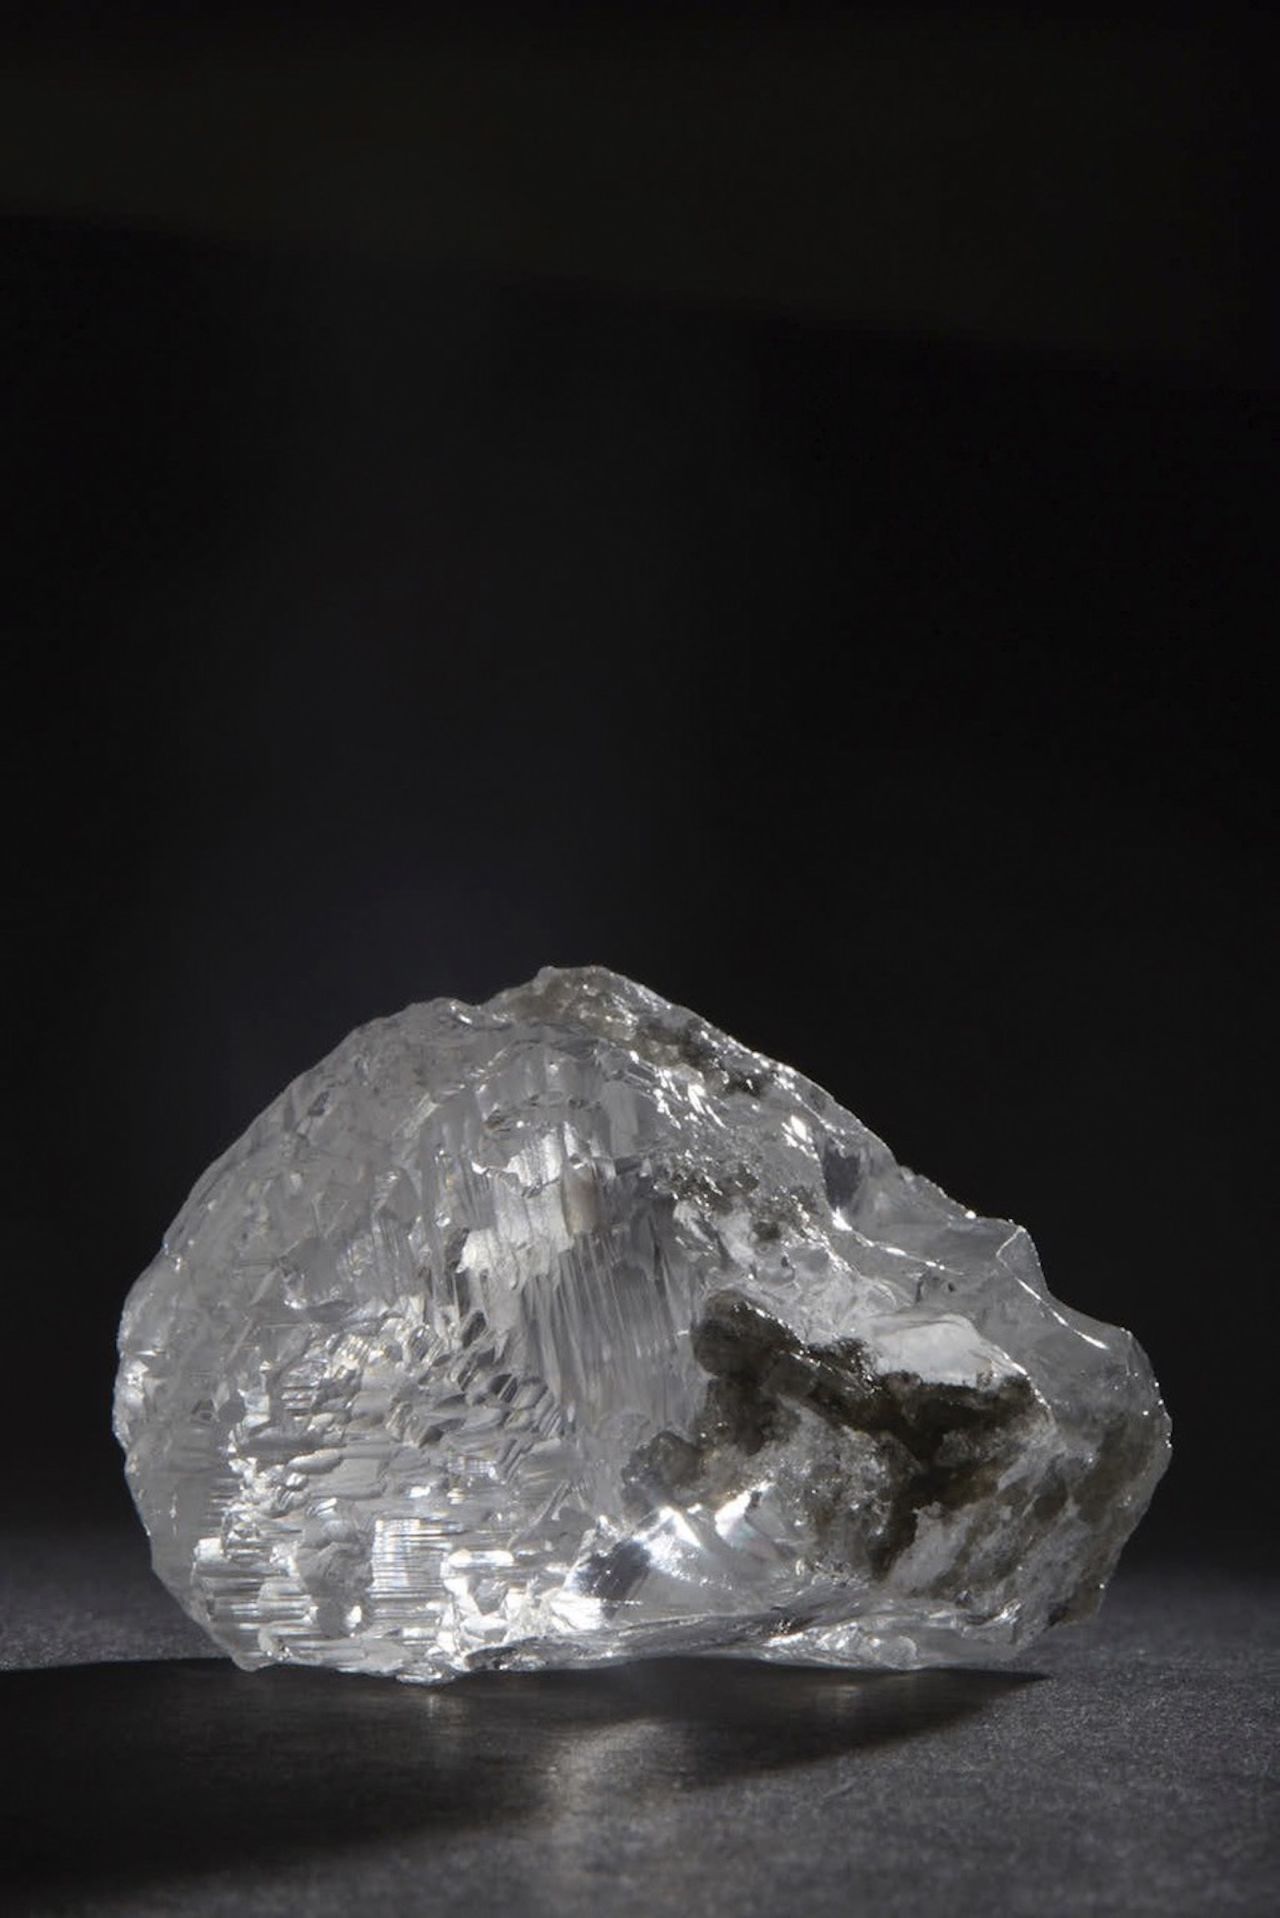 The stone was from a larger, 271-carat rough diamond discovered at the Victor Mine in Ontario, Canada.